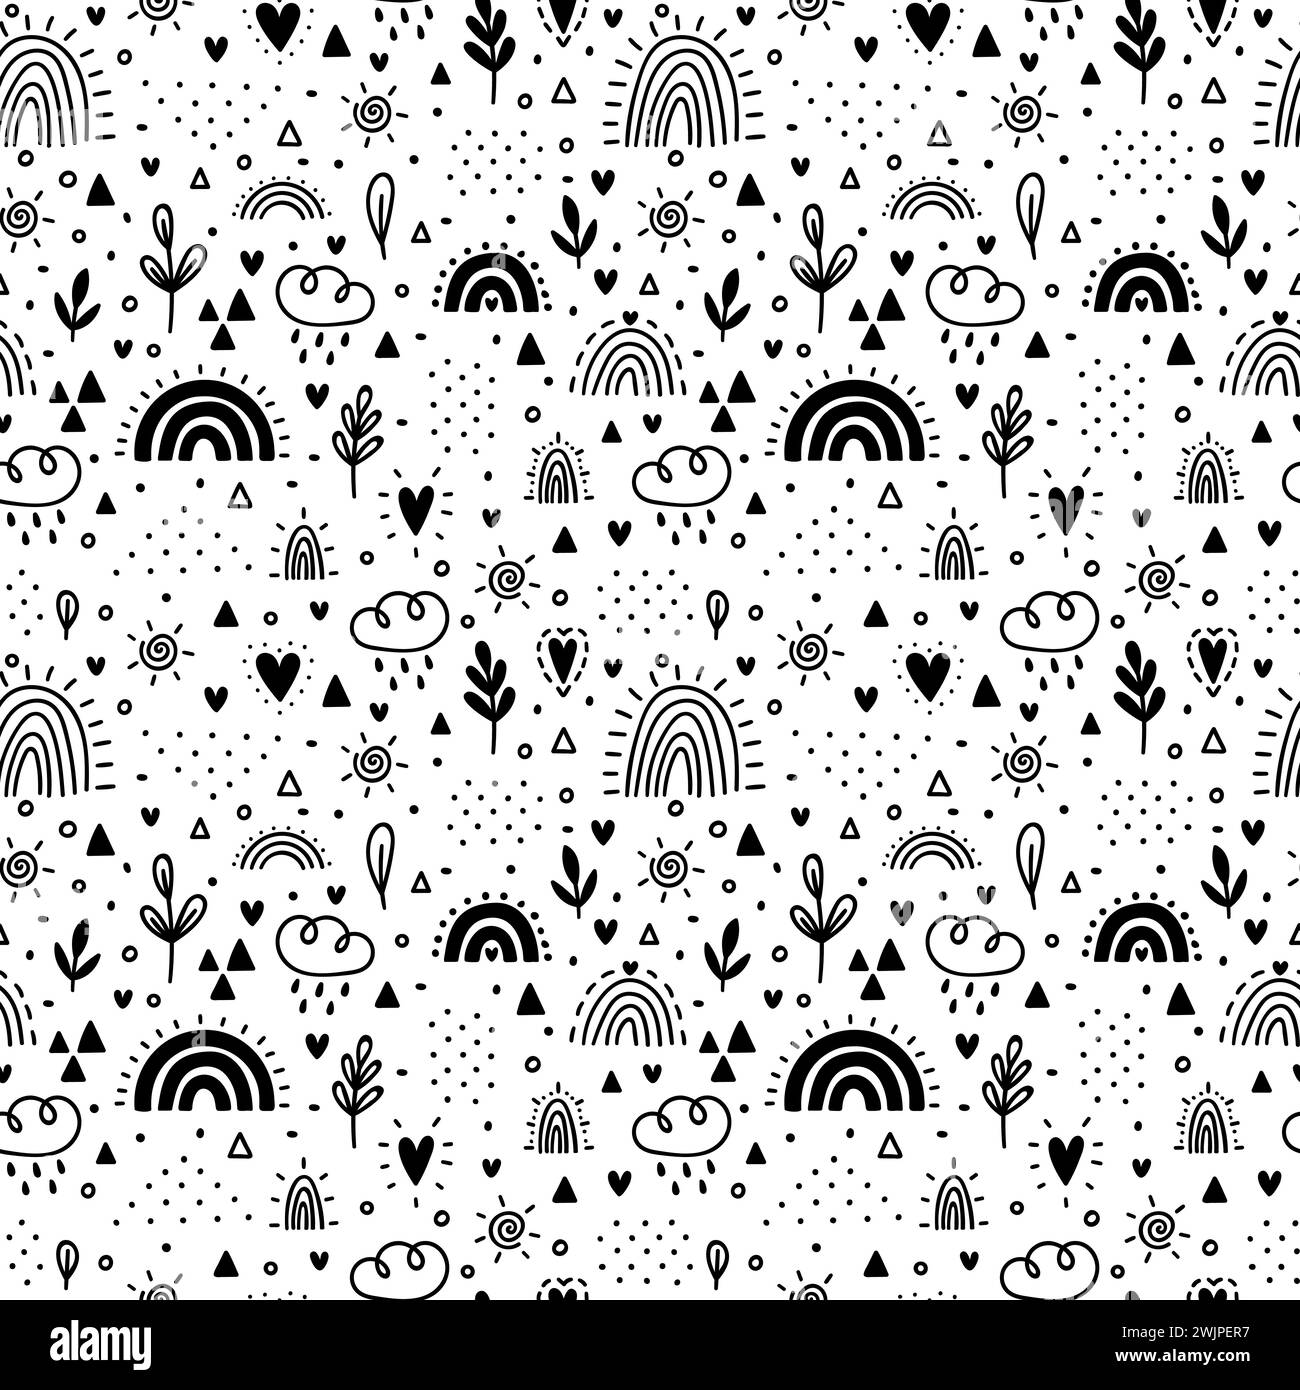 Hand drawn seamless pattern. Nursery design for kids. Childish background with rainbows. Trendy texture for fabric, textile, wrapping paper, cloth. Ve Stock Vector